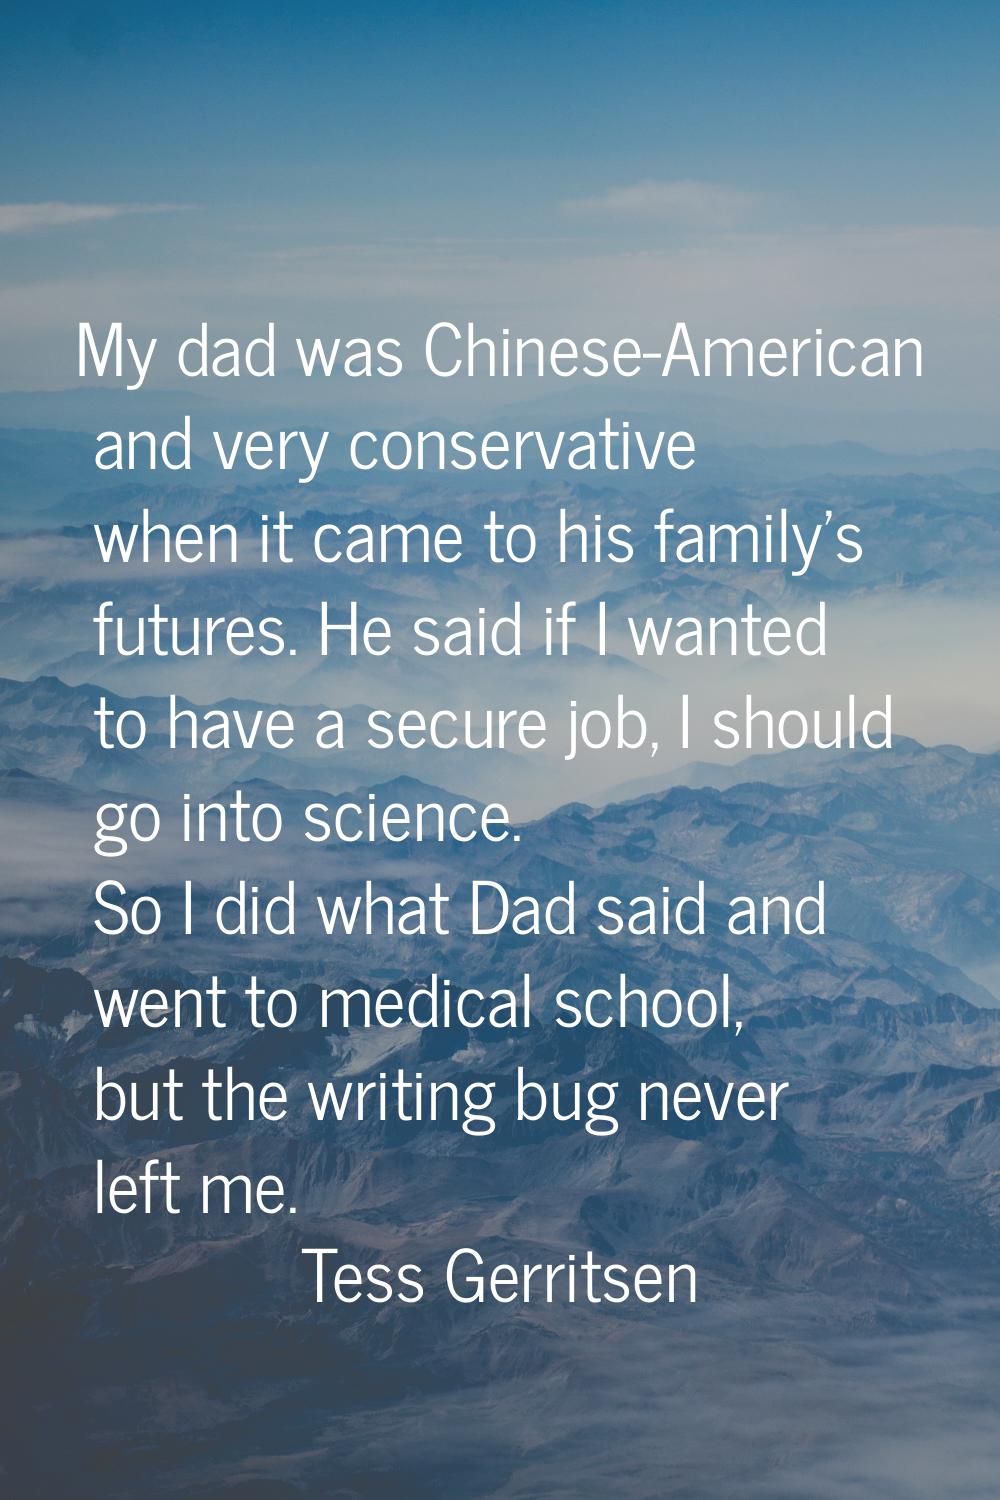 My dad was Chinese-American and very conservative when it came to his family's futures. He said if 